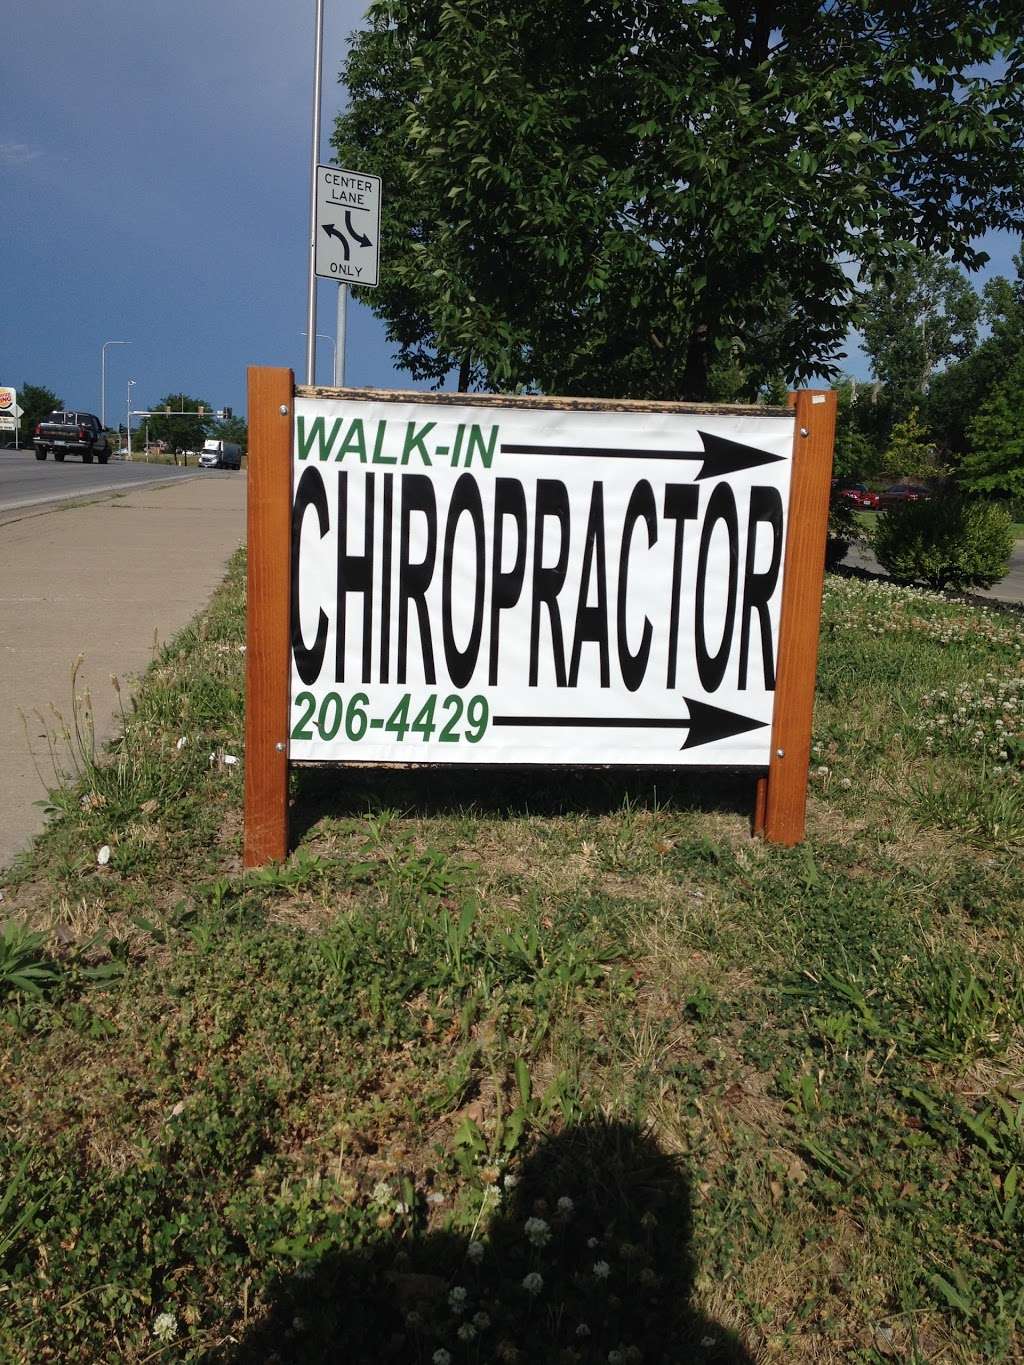 Beautiful Gate Chiropractic | 15812 E US Hwy 24, Independence, MO 64050 | Phone: (816) 206-4429